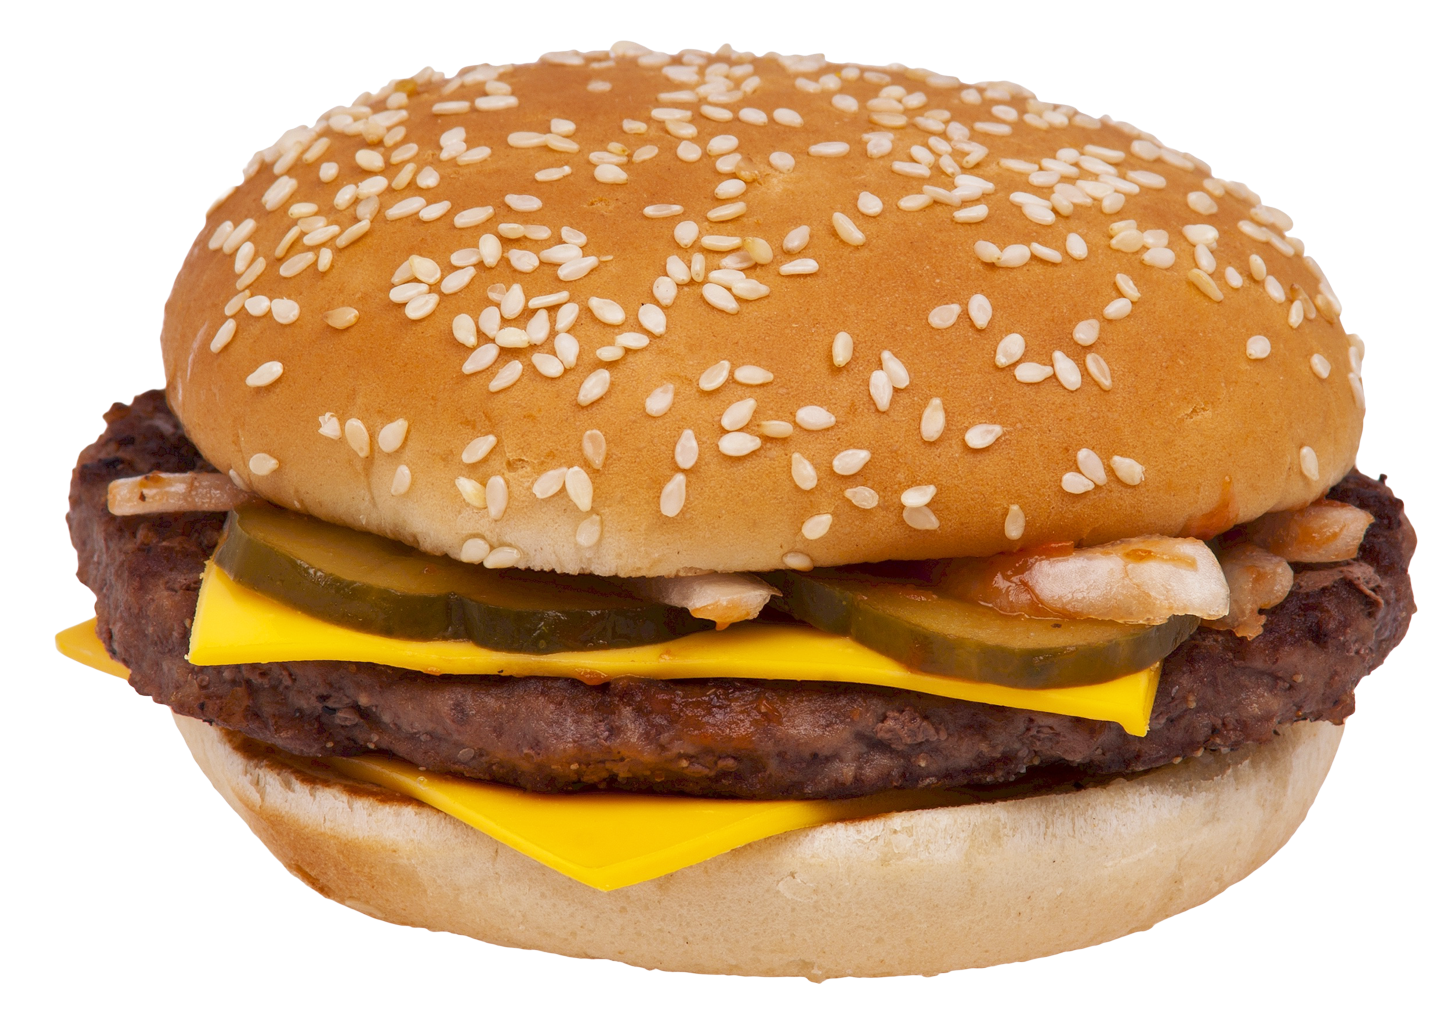 A Cheeseburger With Sesame Seeds On Top